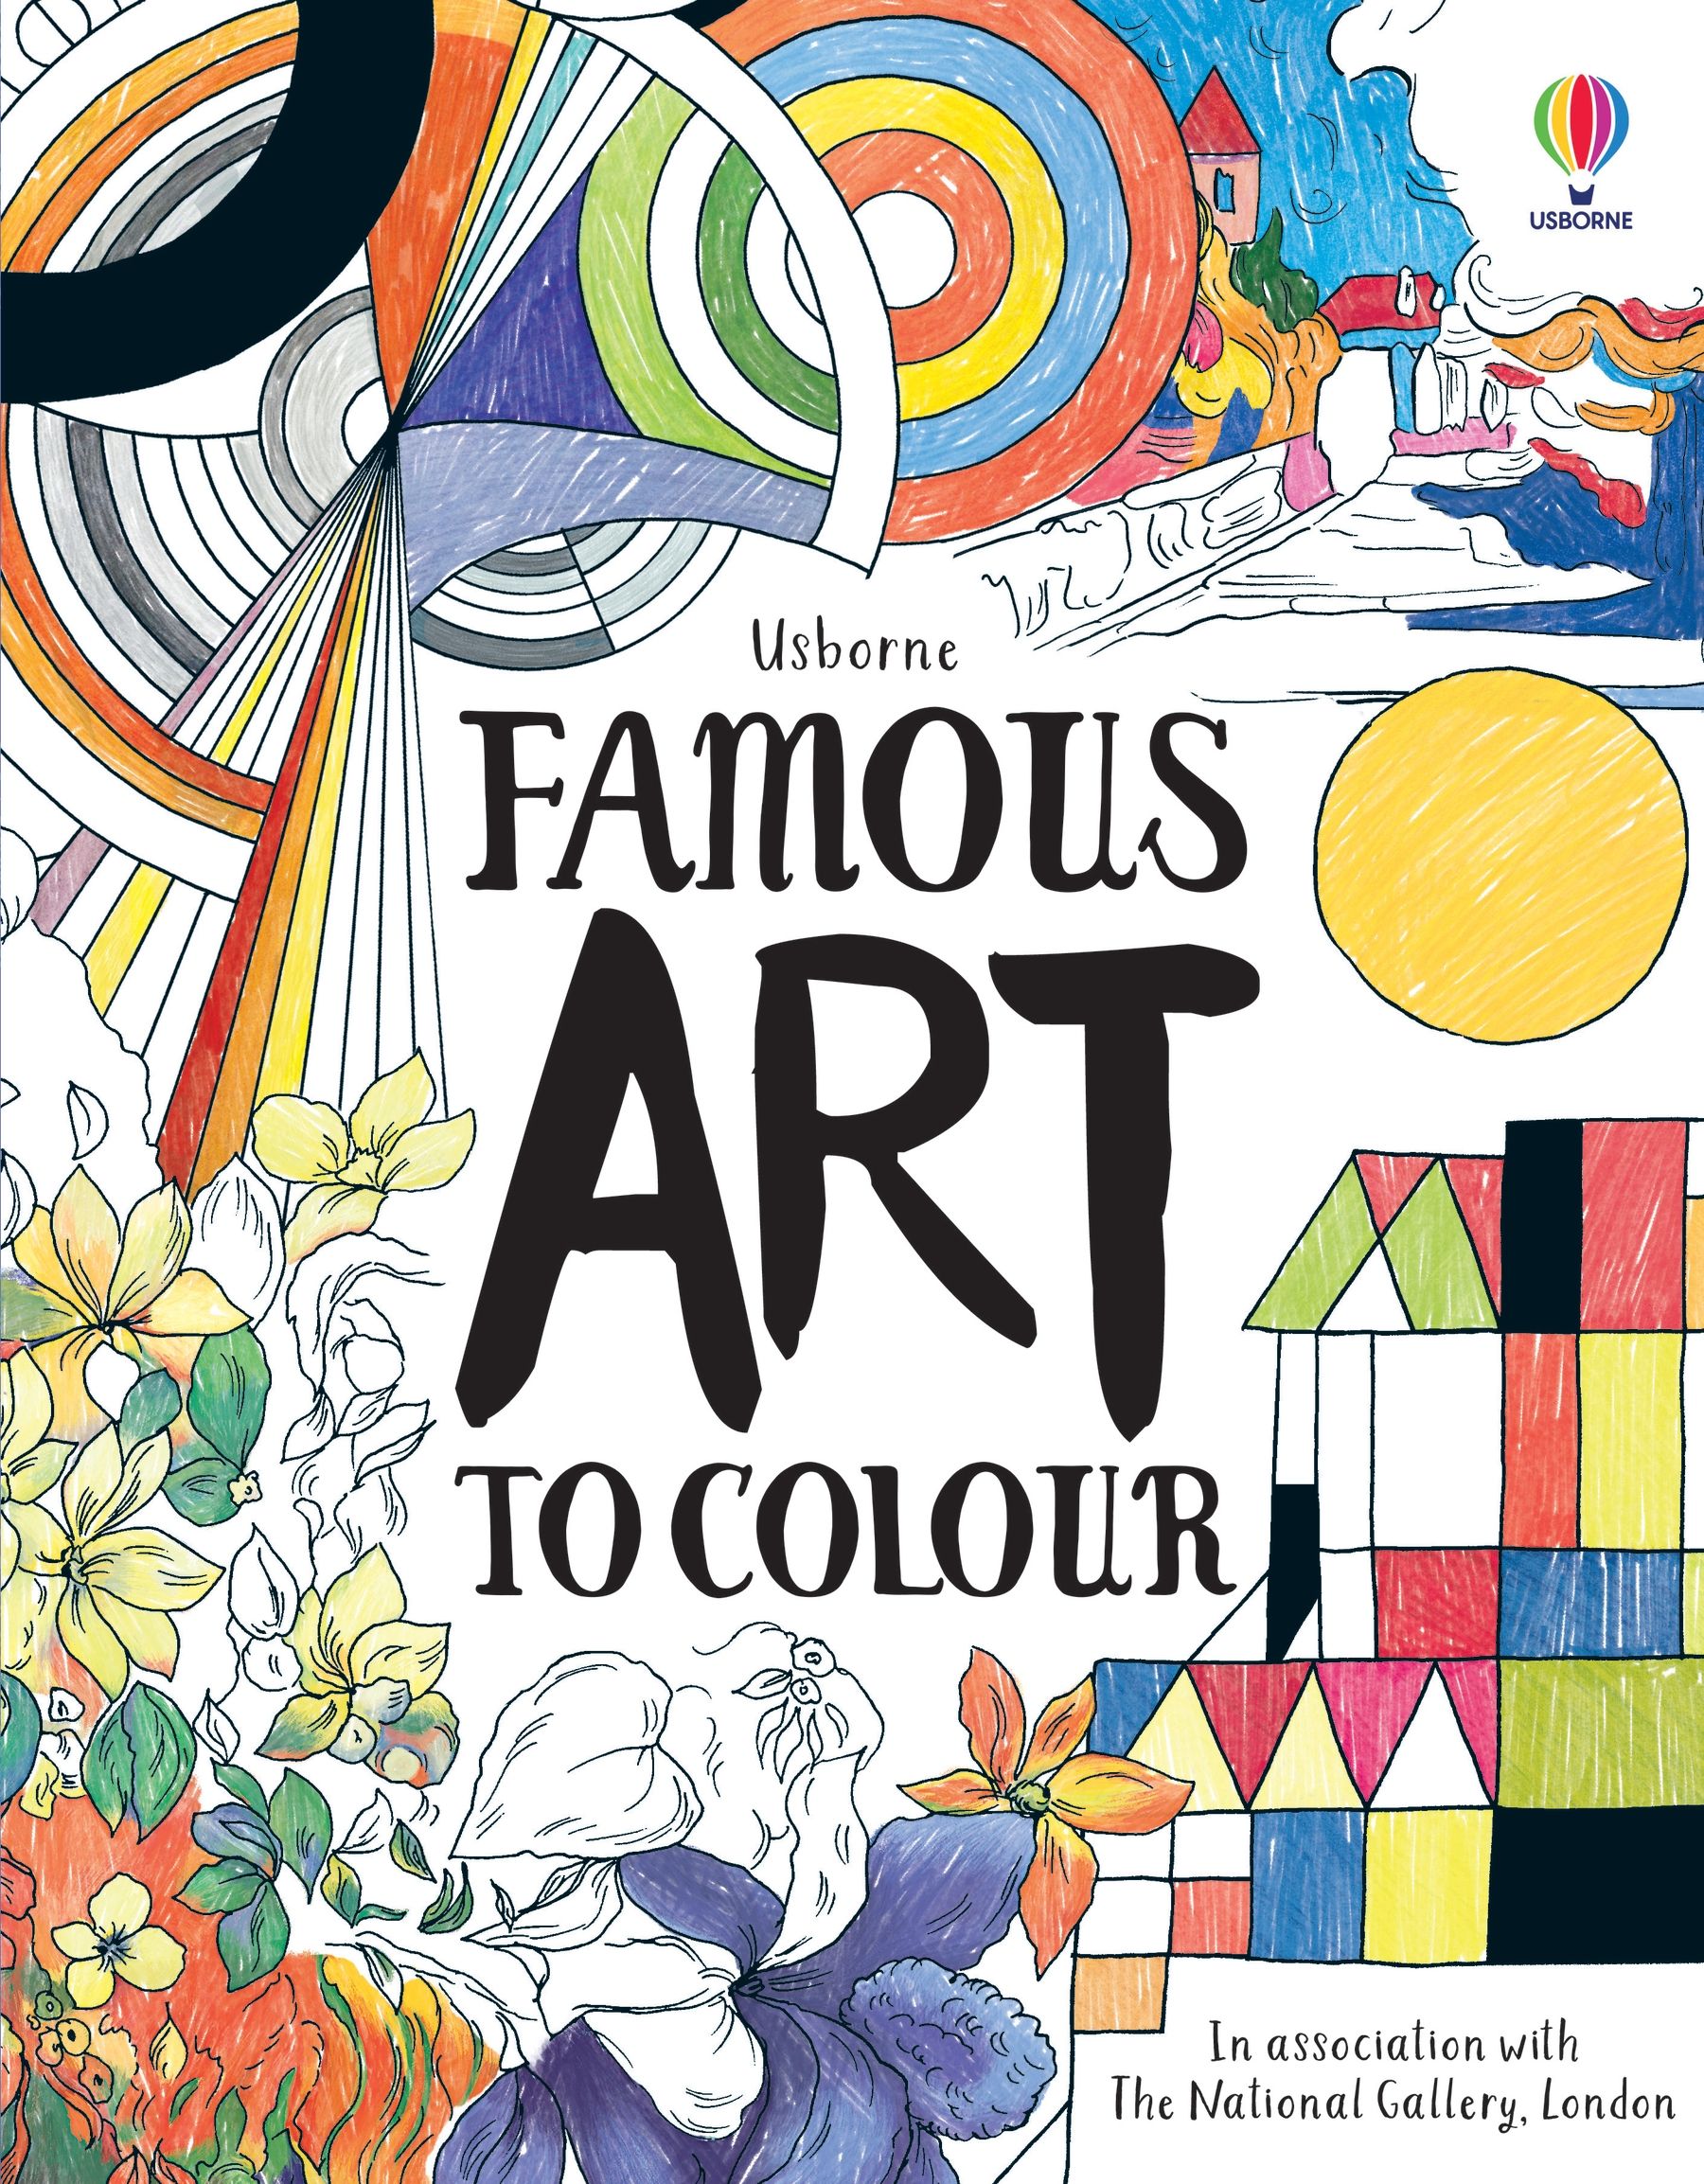 The front cover of a colouring book called 'Famous Art to Colour' by Usborne in association with the National Gallery London. The cover shows a preview of the paintings inside that are available to colour and learn about.